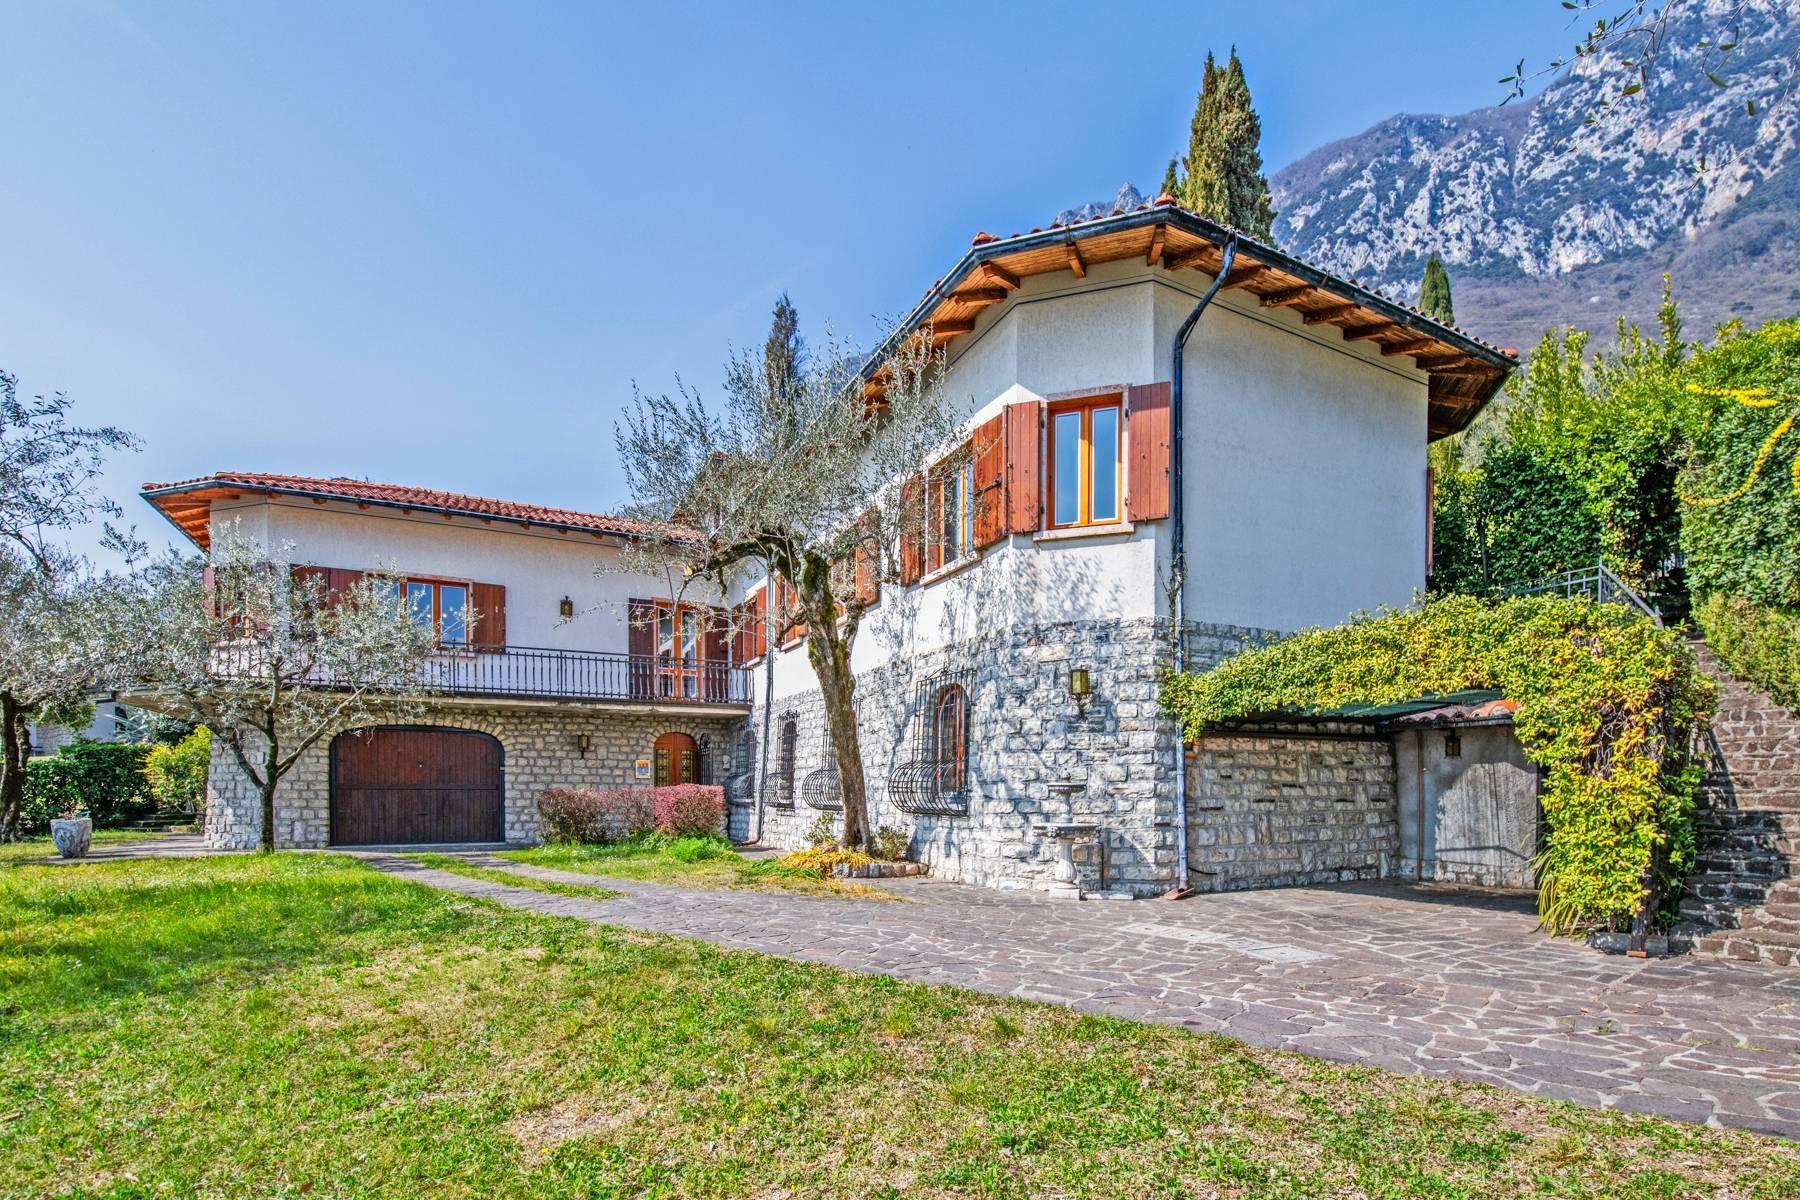 Villa with lake view in Gargnano surrounded by olive trees - 14